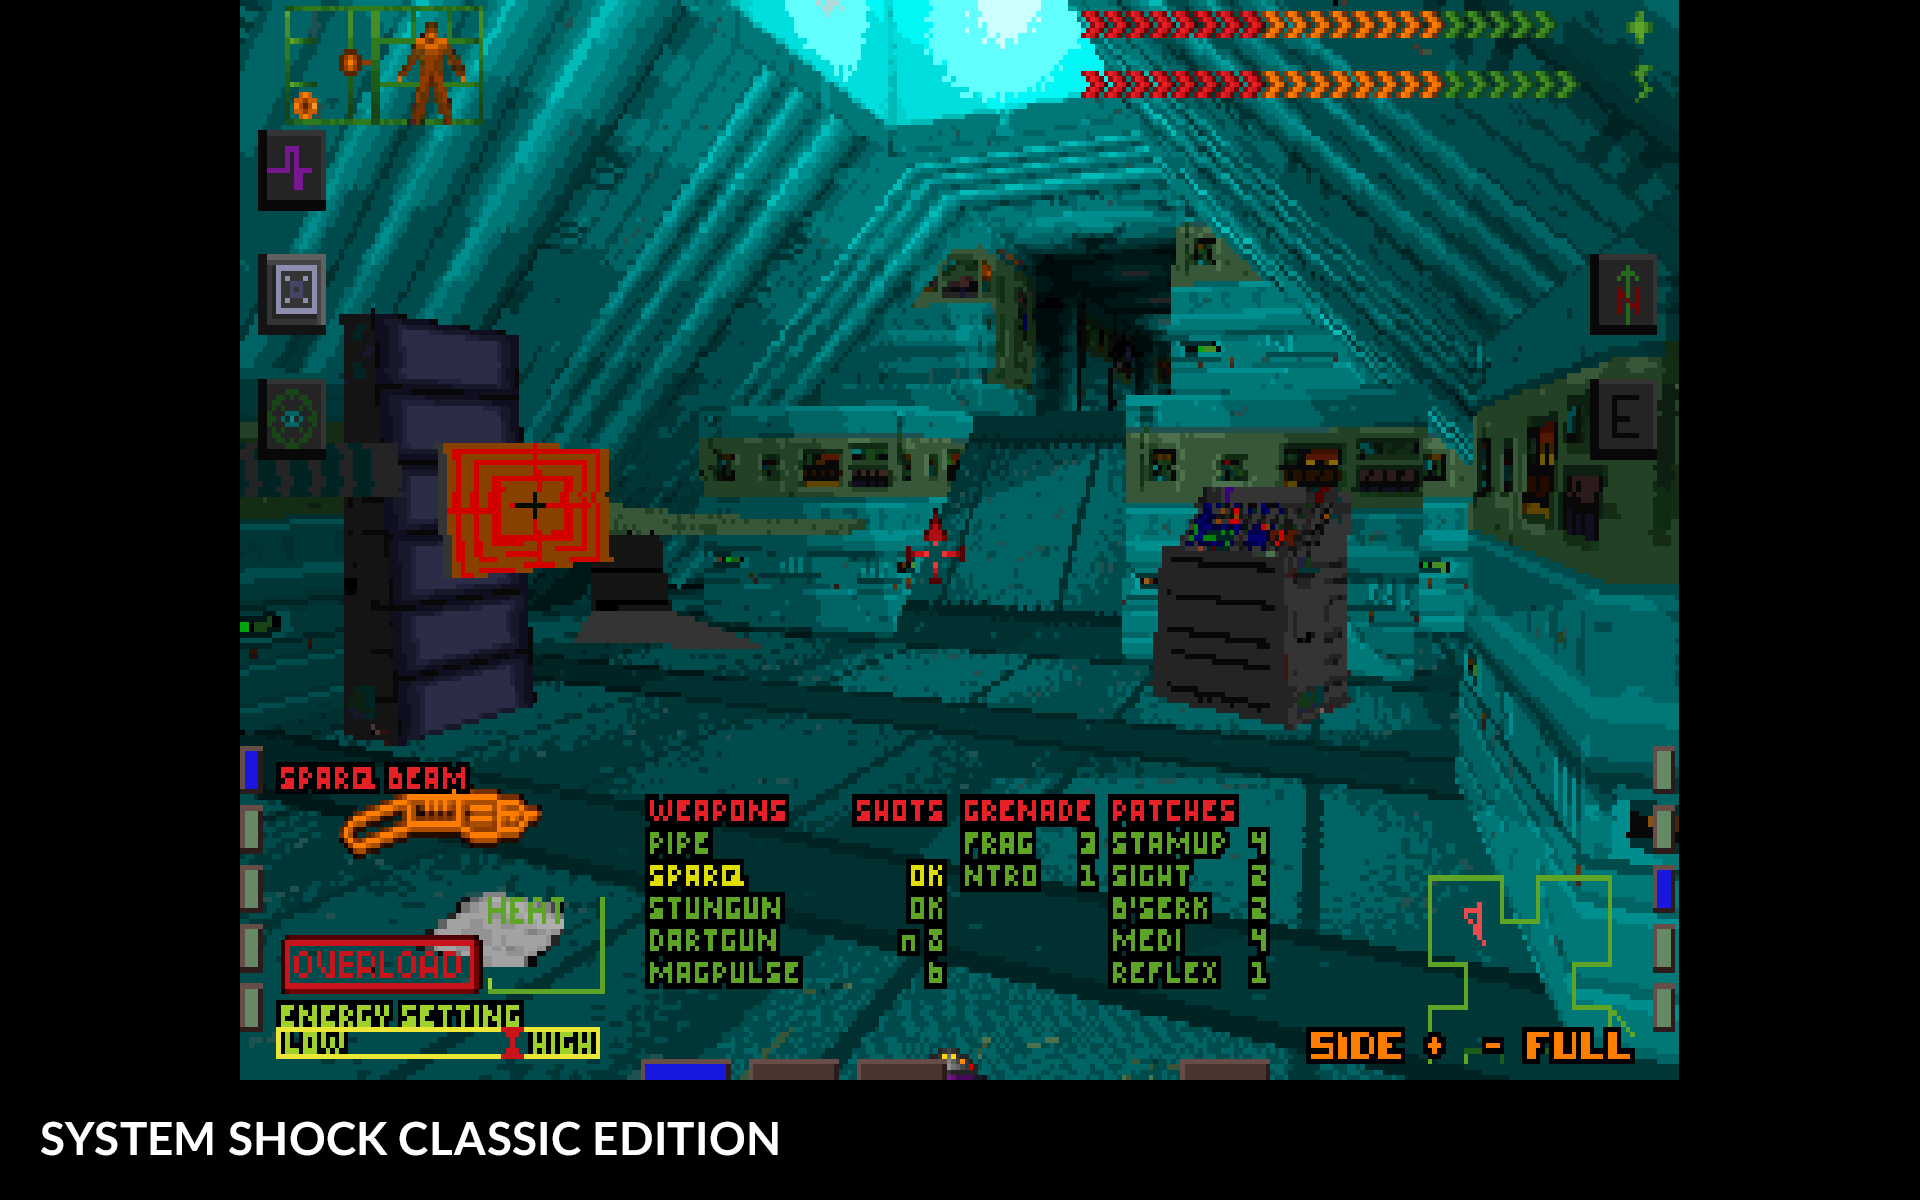 system shock 2 difficulty differences regenerate